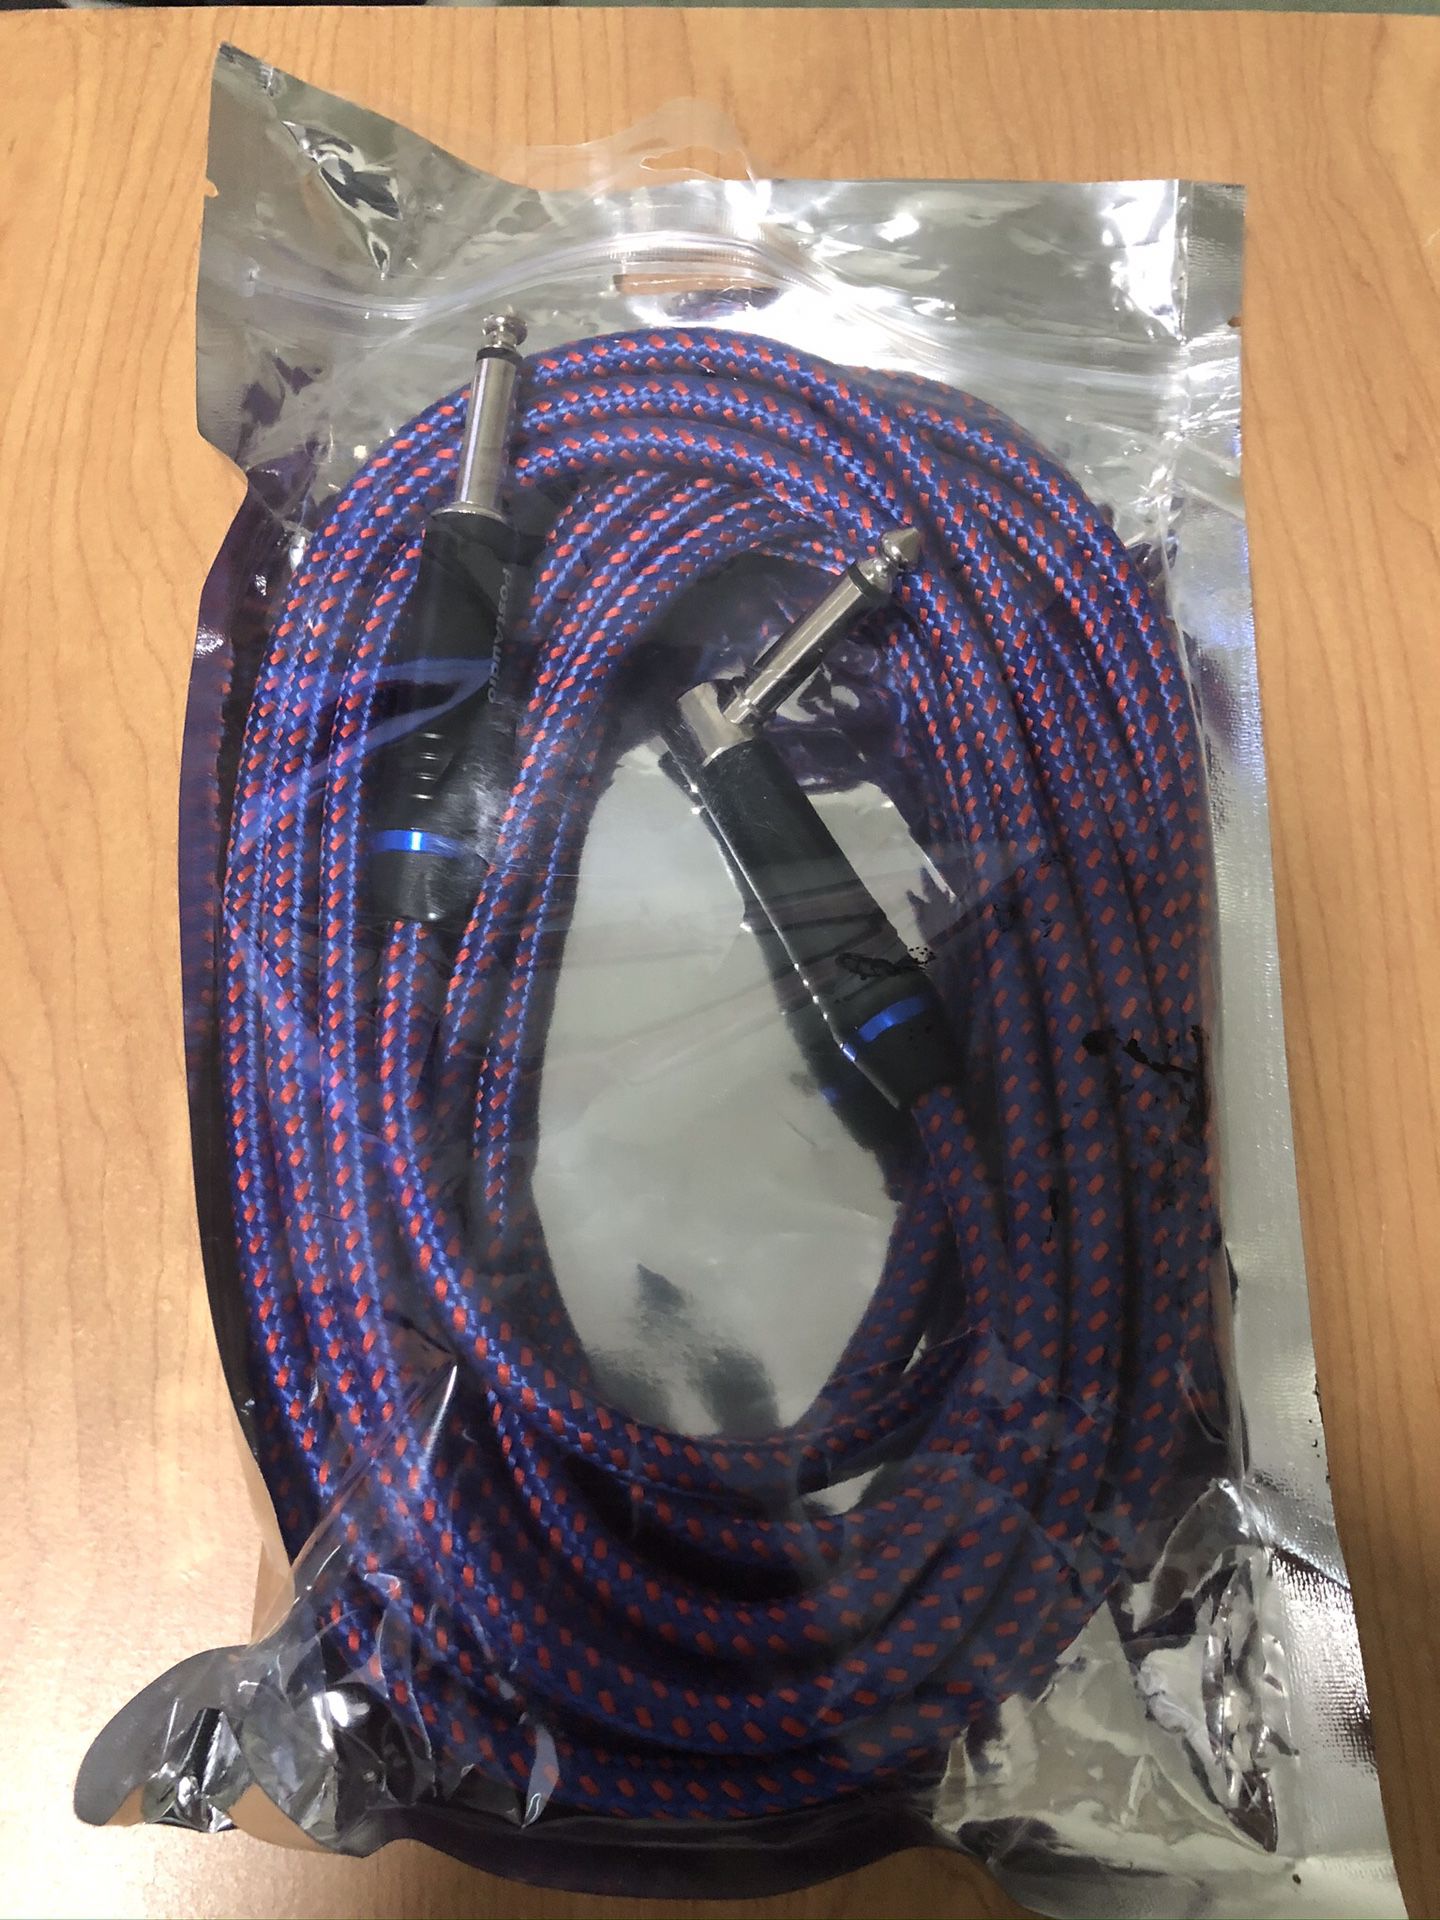 20 ft Right-Angle cable heavy duty commercial quality, for Electric Guitars, Musical/Audio Instruments new never used. Fender, Squier, bass, amp, eff